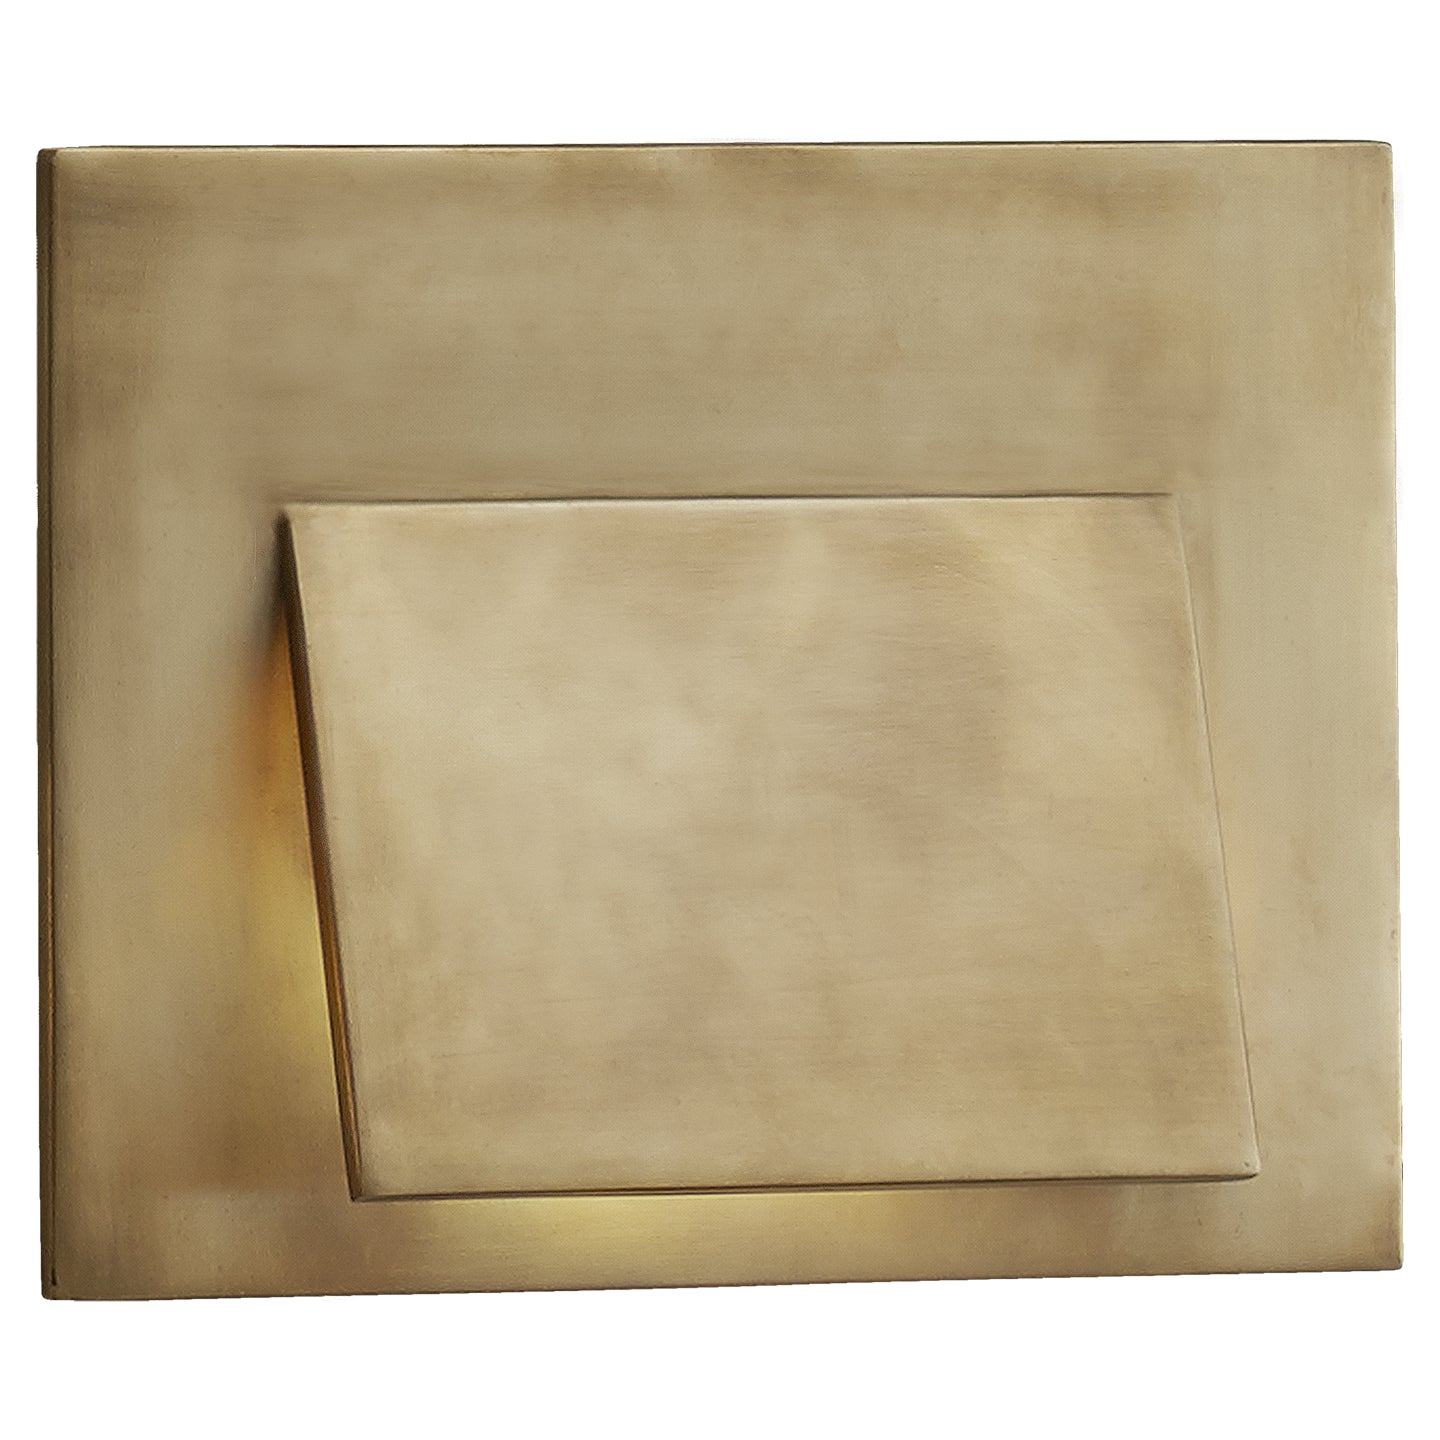 Visual Comfort Signature - KW 2706AB - LED Wall Sconce - Esker - Antique-Burnished Brass